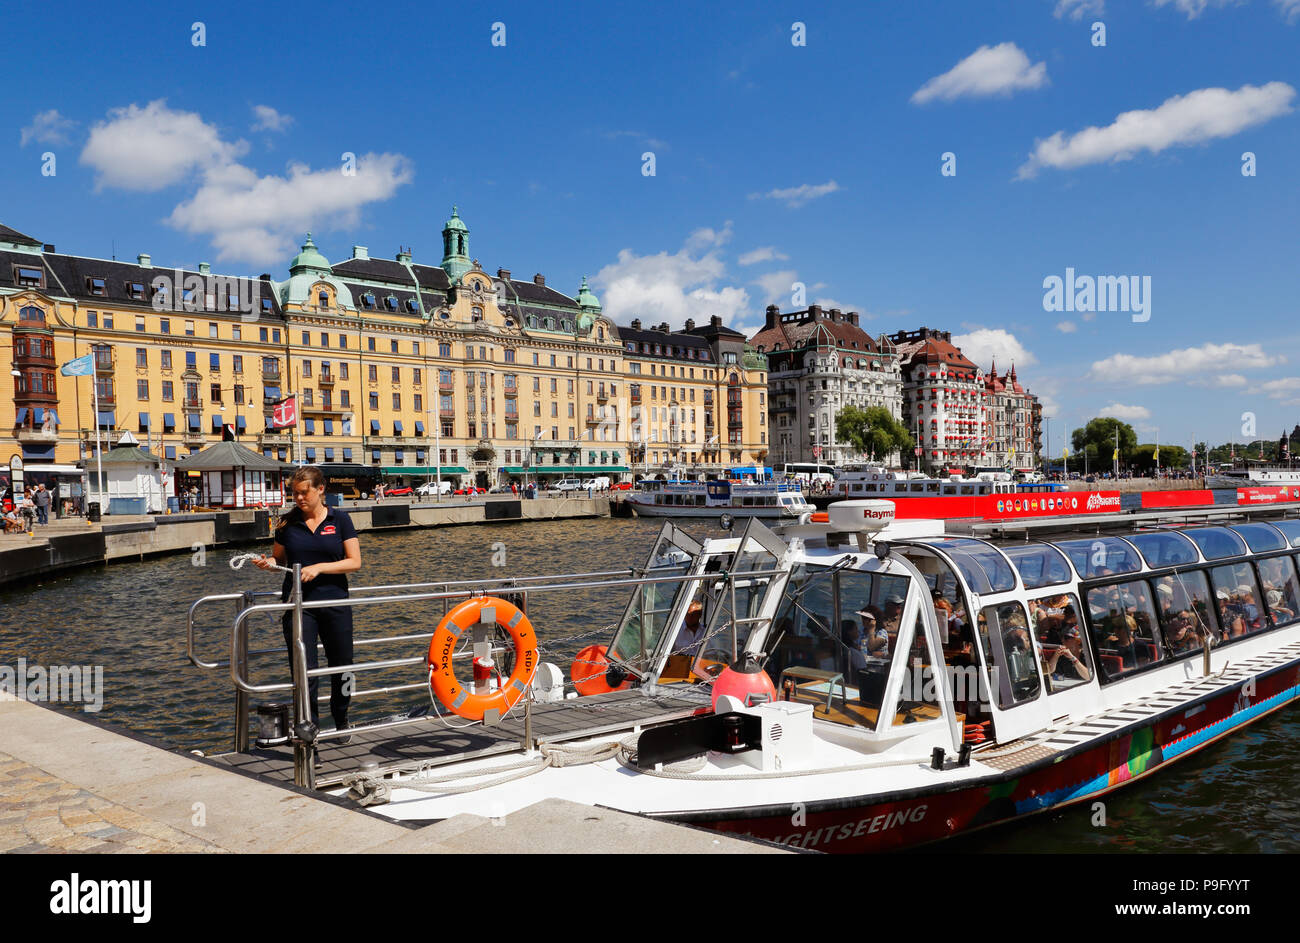 Stockholm, Sweden - July 12, 2018: Sightseeing boat operated by Red sightsseeing hop-on hop-off service at Nybrokajen. Stock Photo